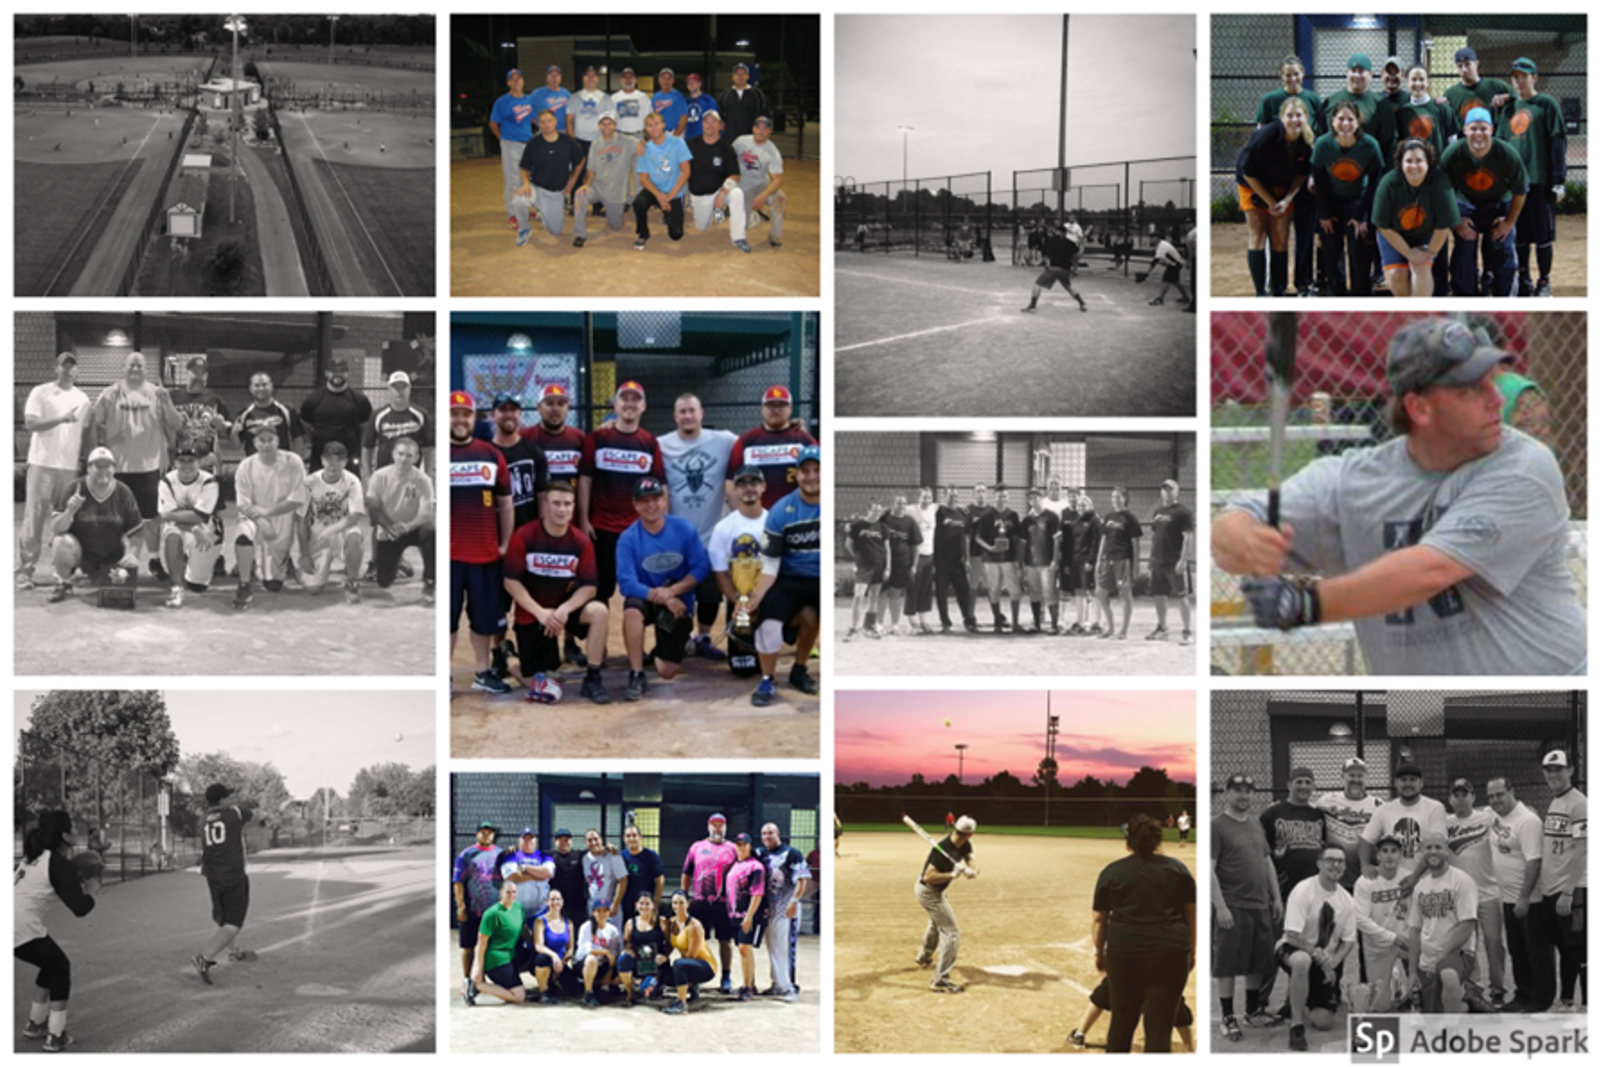 Softball images over the years